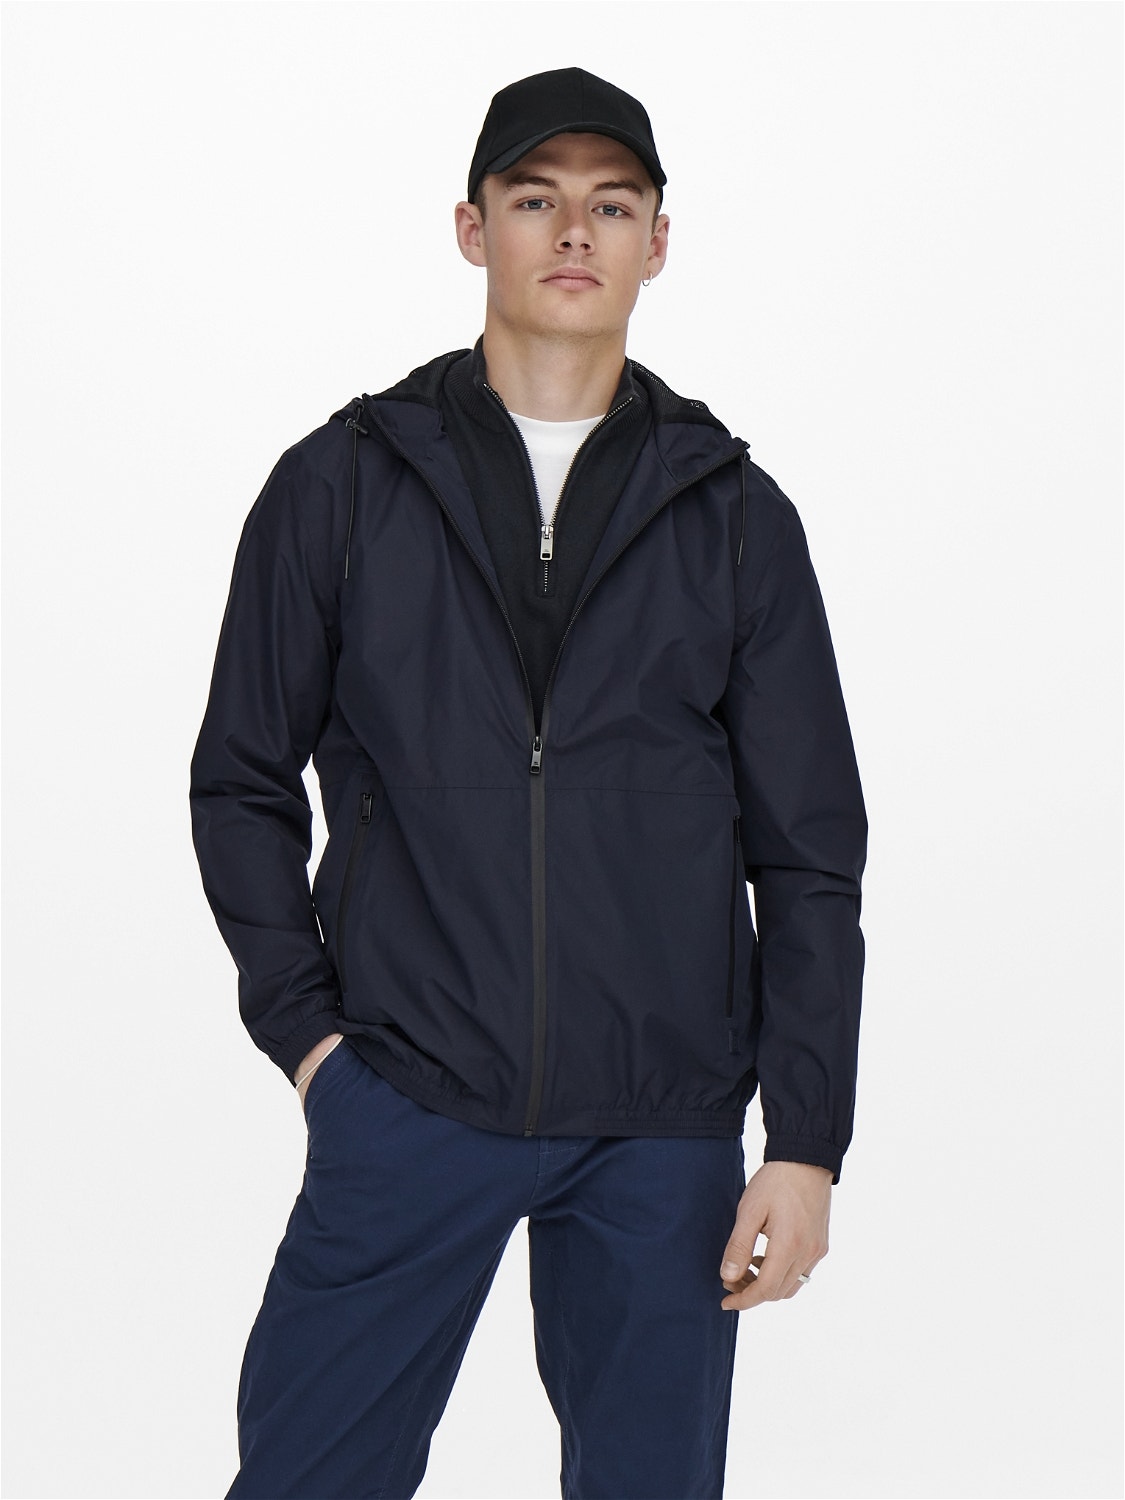 ONLY & SONS Hood with string regulation Elasticated cuffs Jacket -Dark Navy - 22021518